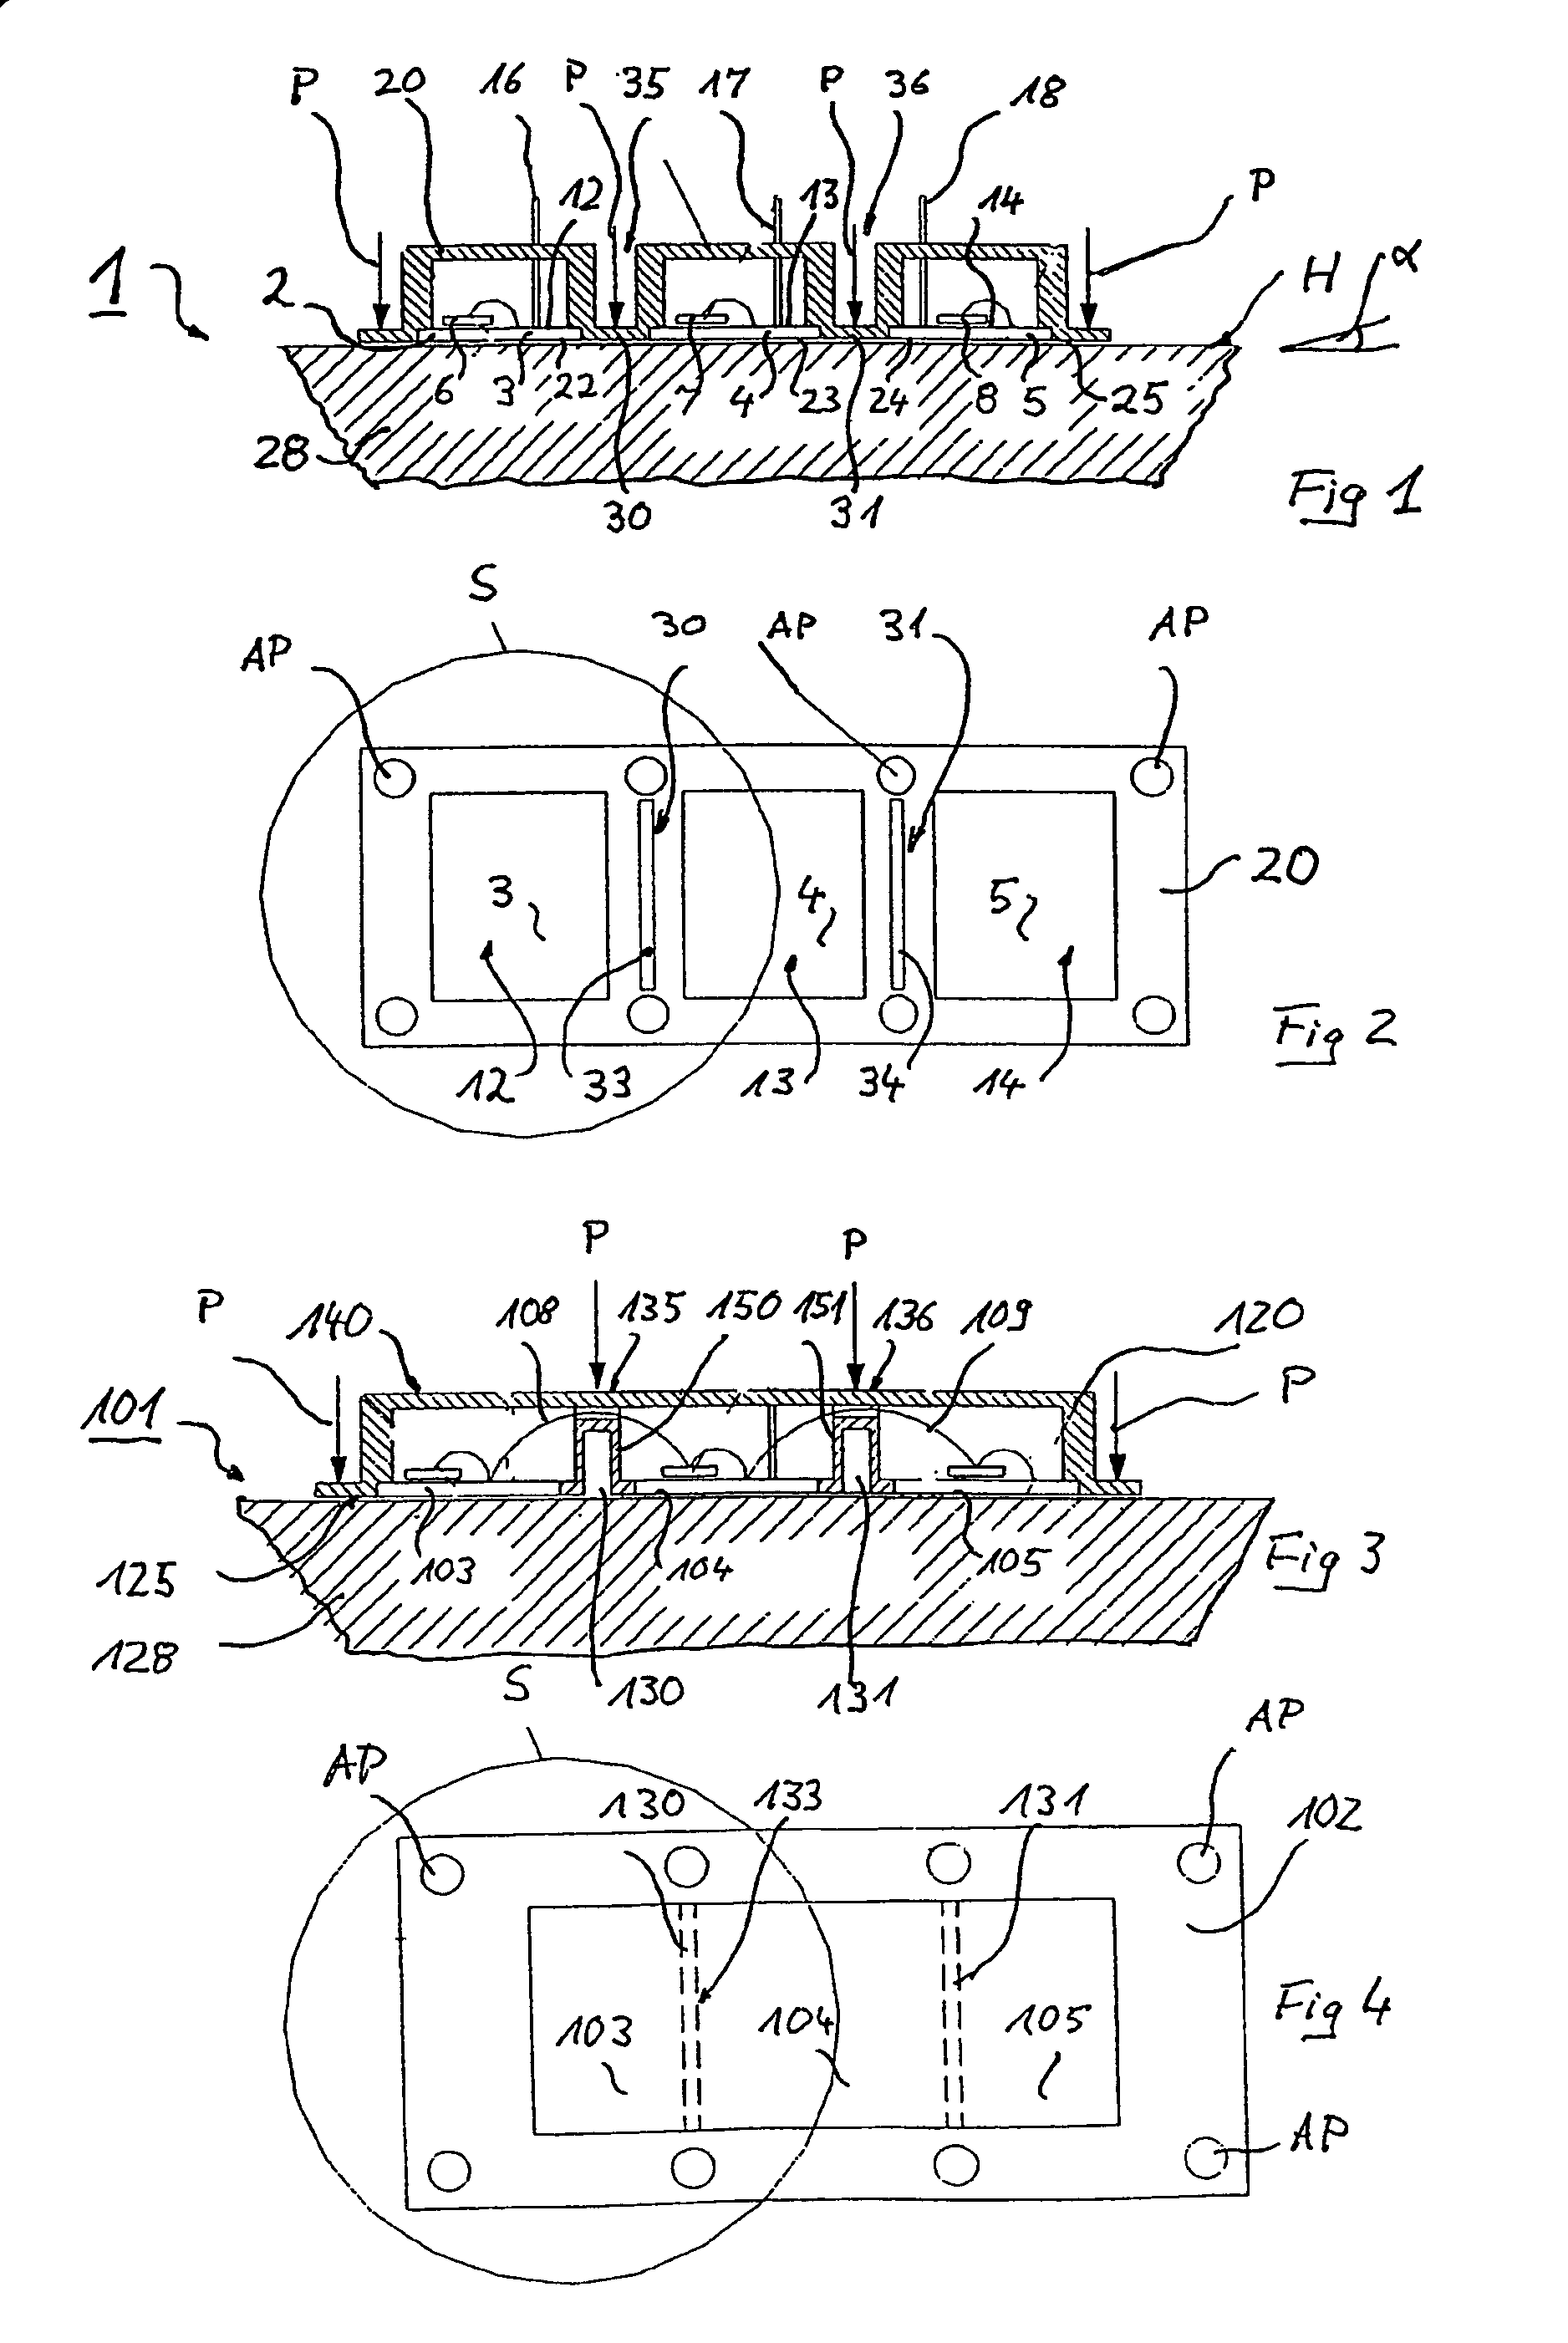 Power semiconductor module comprising elastic housing for accommodating movement of individual substrate regions on a heat sink